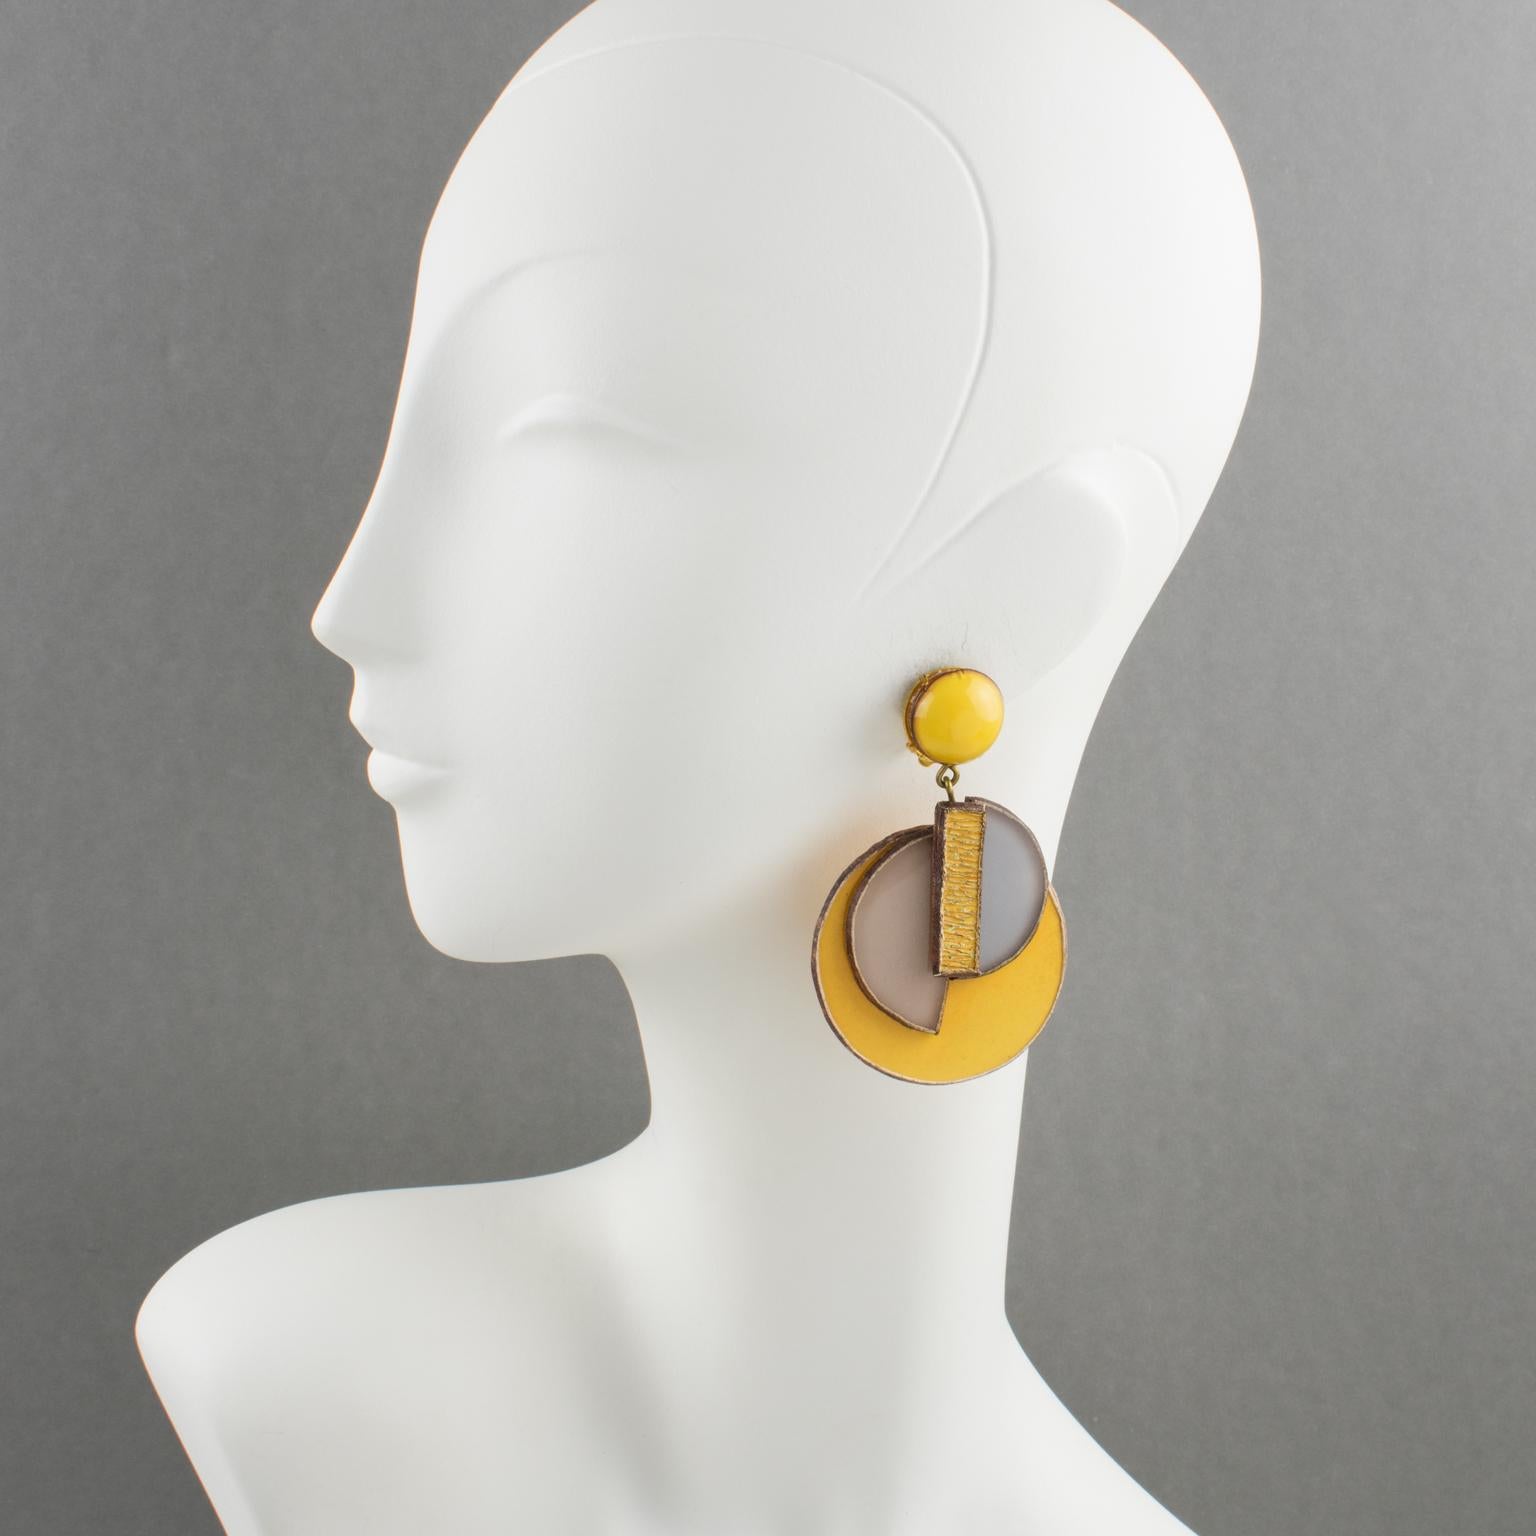 Elegant dimensional dangling clip-on earrings by Cilea Paris. Art Deco revival inspired hand-made artisanal resin earrings featuring assorted geometric forms with textured patterns to build together and form a powerful statement piece. Very nice